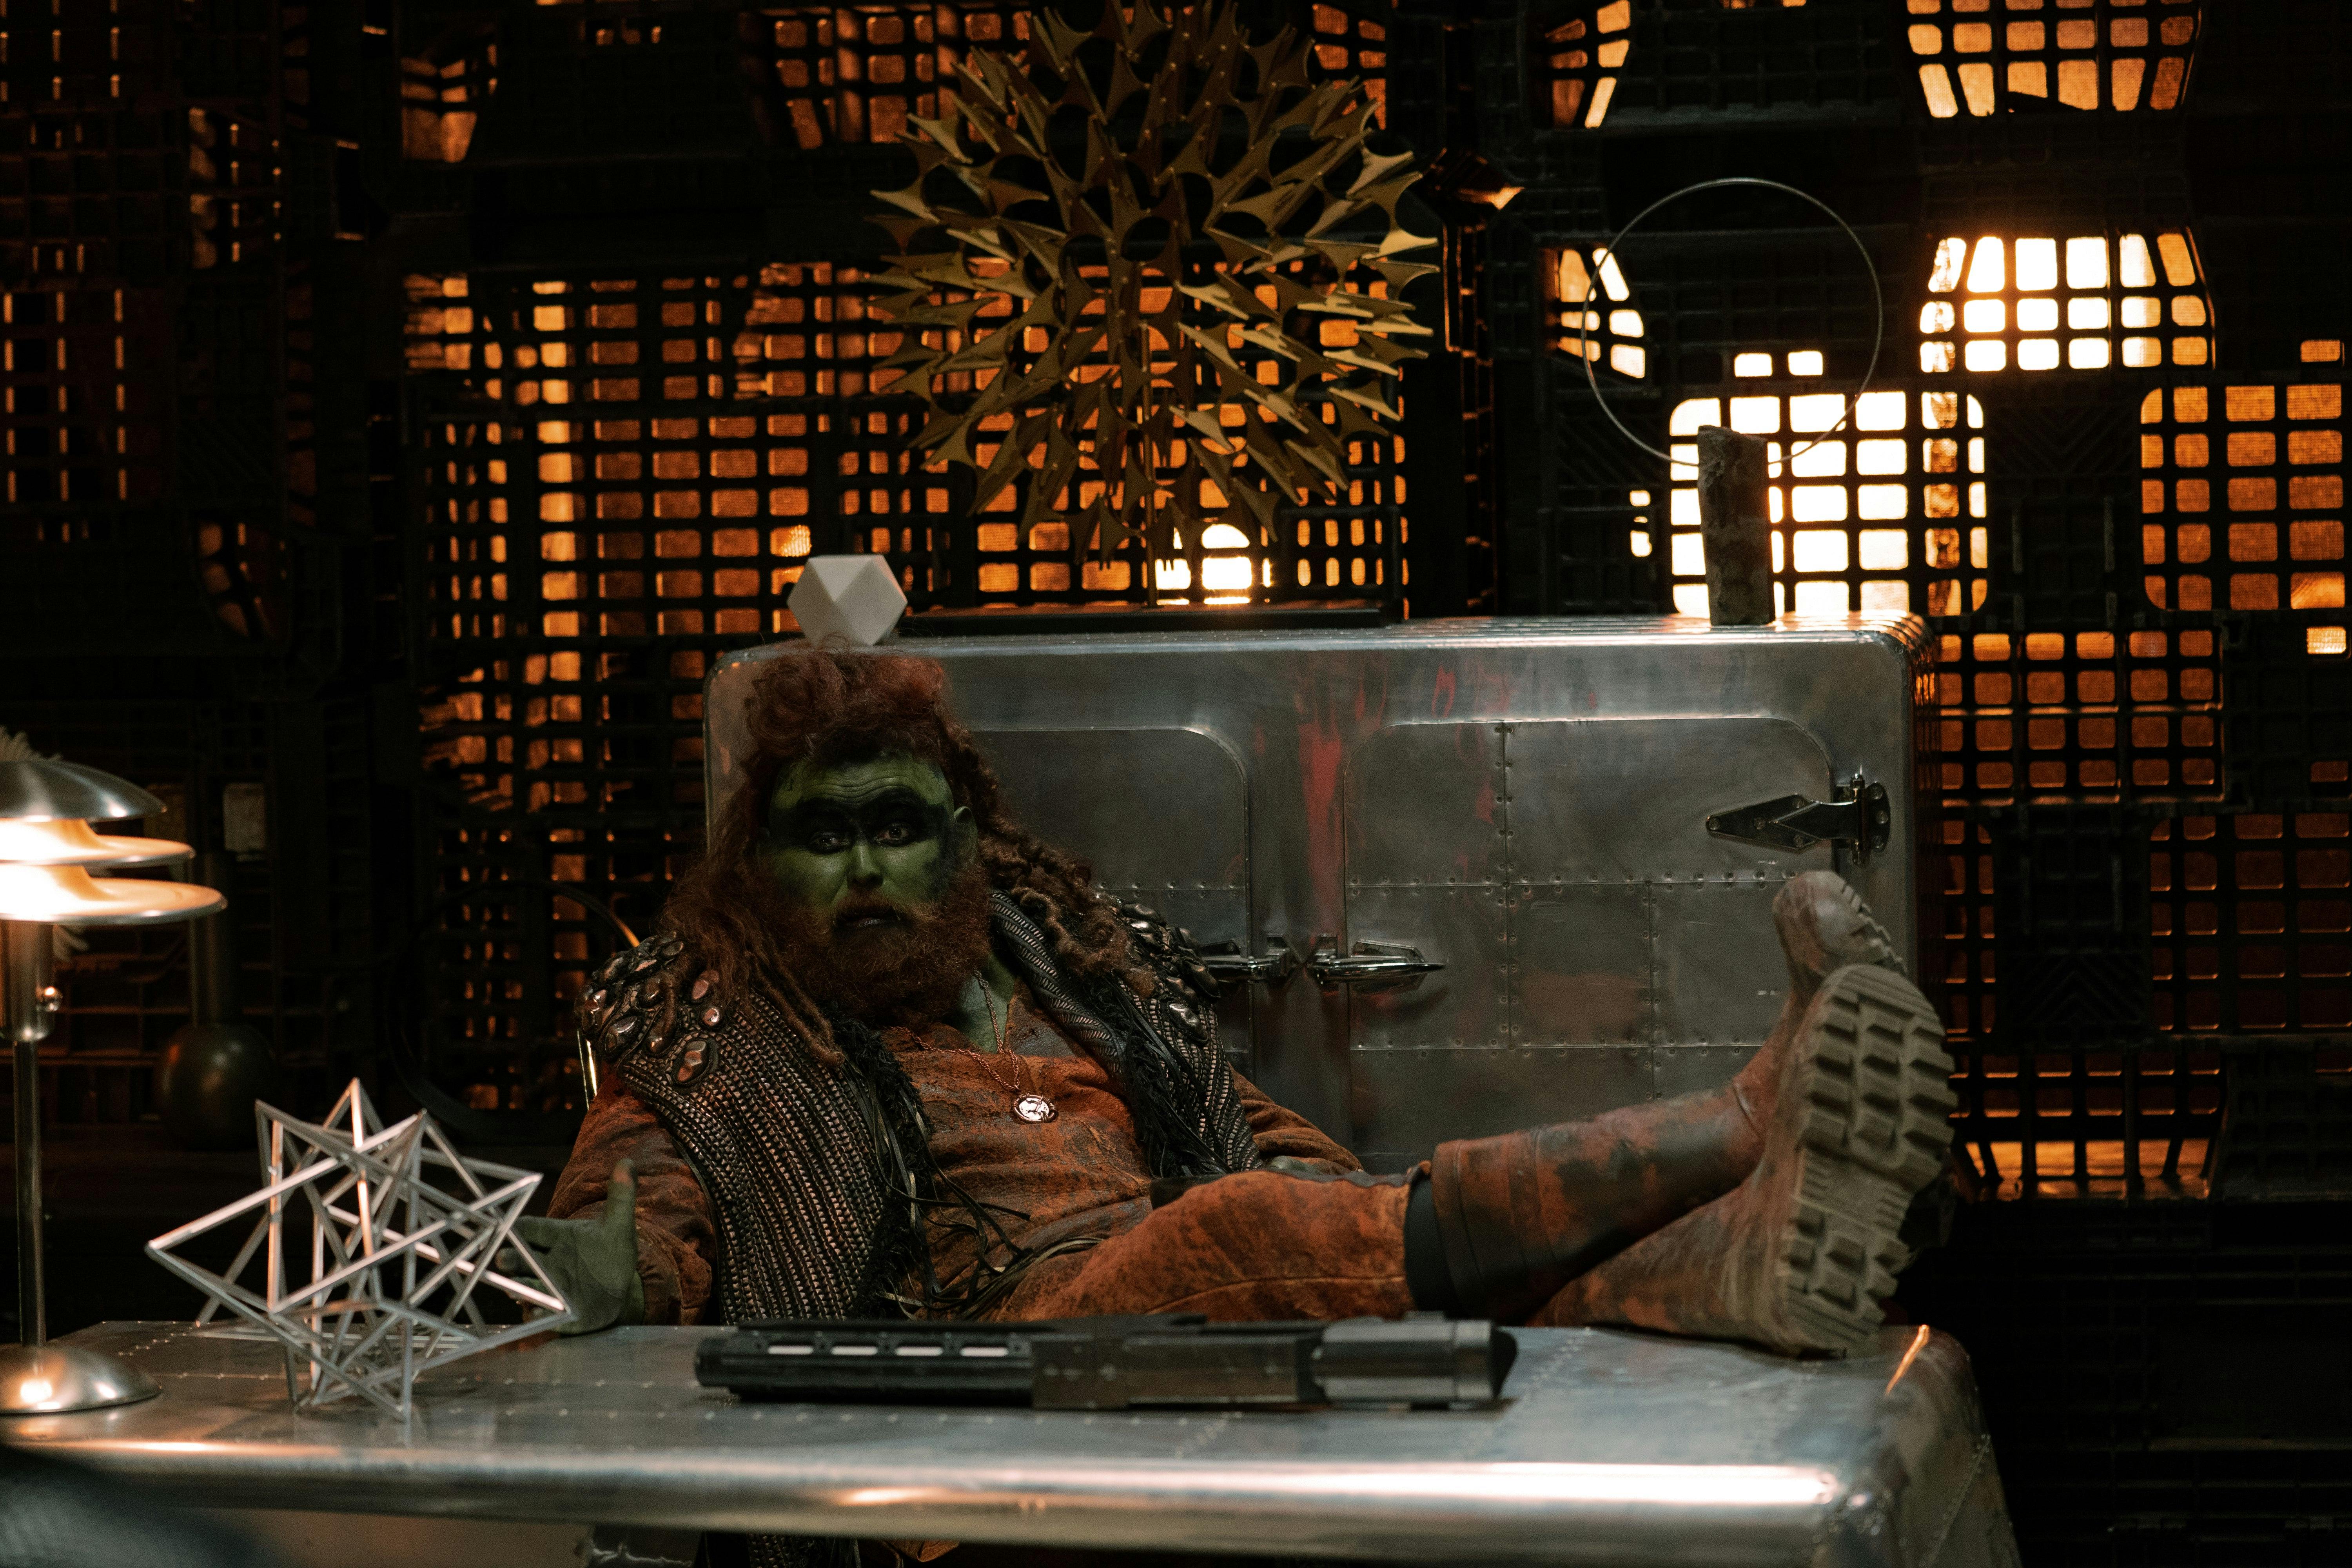 A green alien with red hair and a red beard sits behind a desk with his feet up.